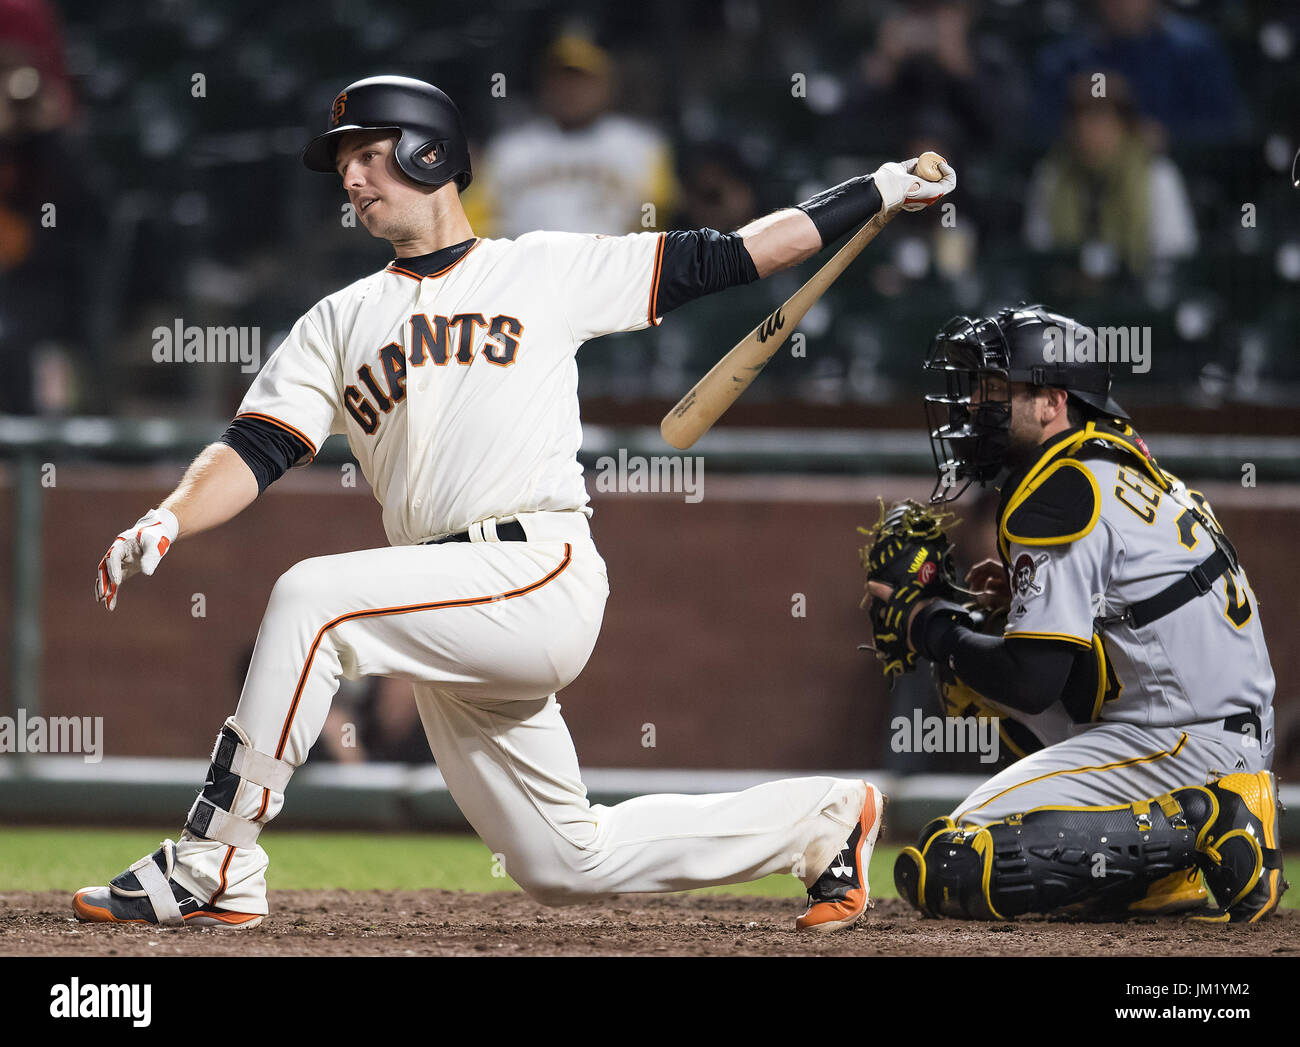 San Francisco, California, USA. 24th July, 2017. San Francisco Giants catcher Buster Posey (28) swings for strike two, with two outs in the bottom of the ninth inning, during a MLB game between the Pittsburgh Pirates and the San Francisco Giants at AT&T Park in San Francisco, California. The Pirates won 10-3. Valerie Shoaps/CSM/Alamy Live News Stock Photo